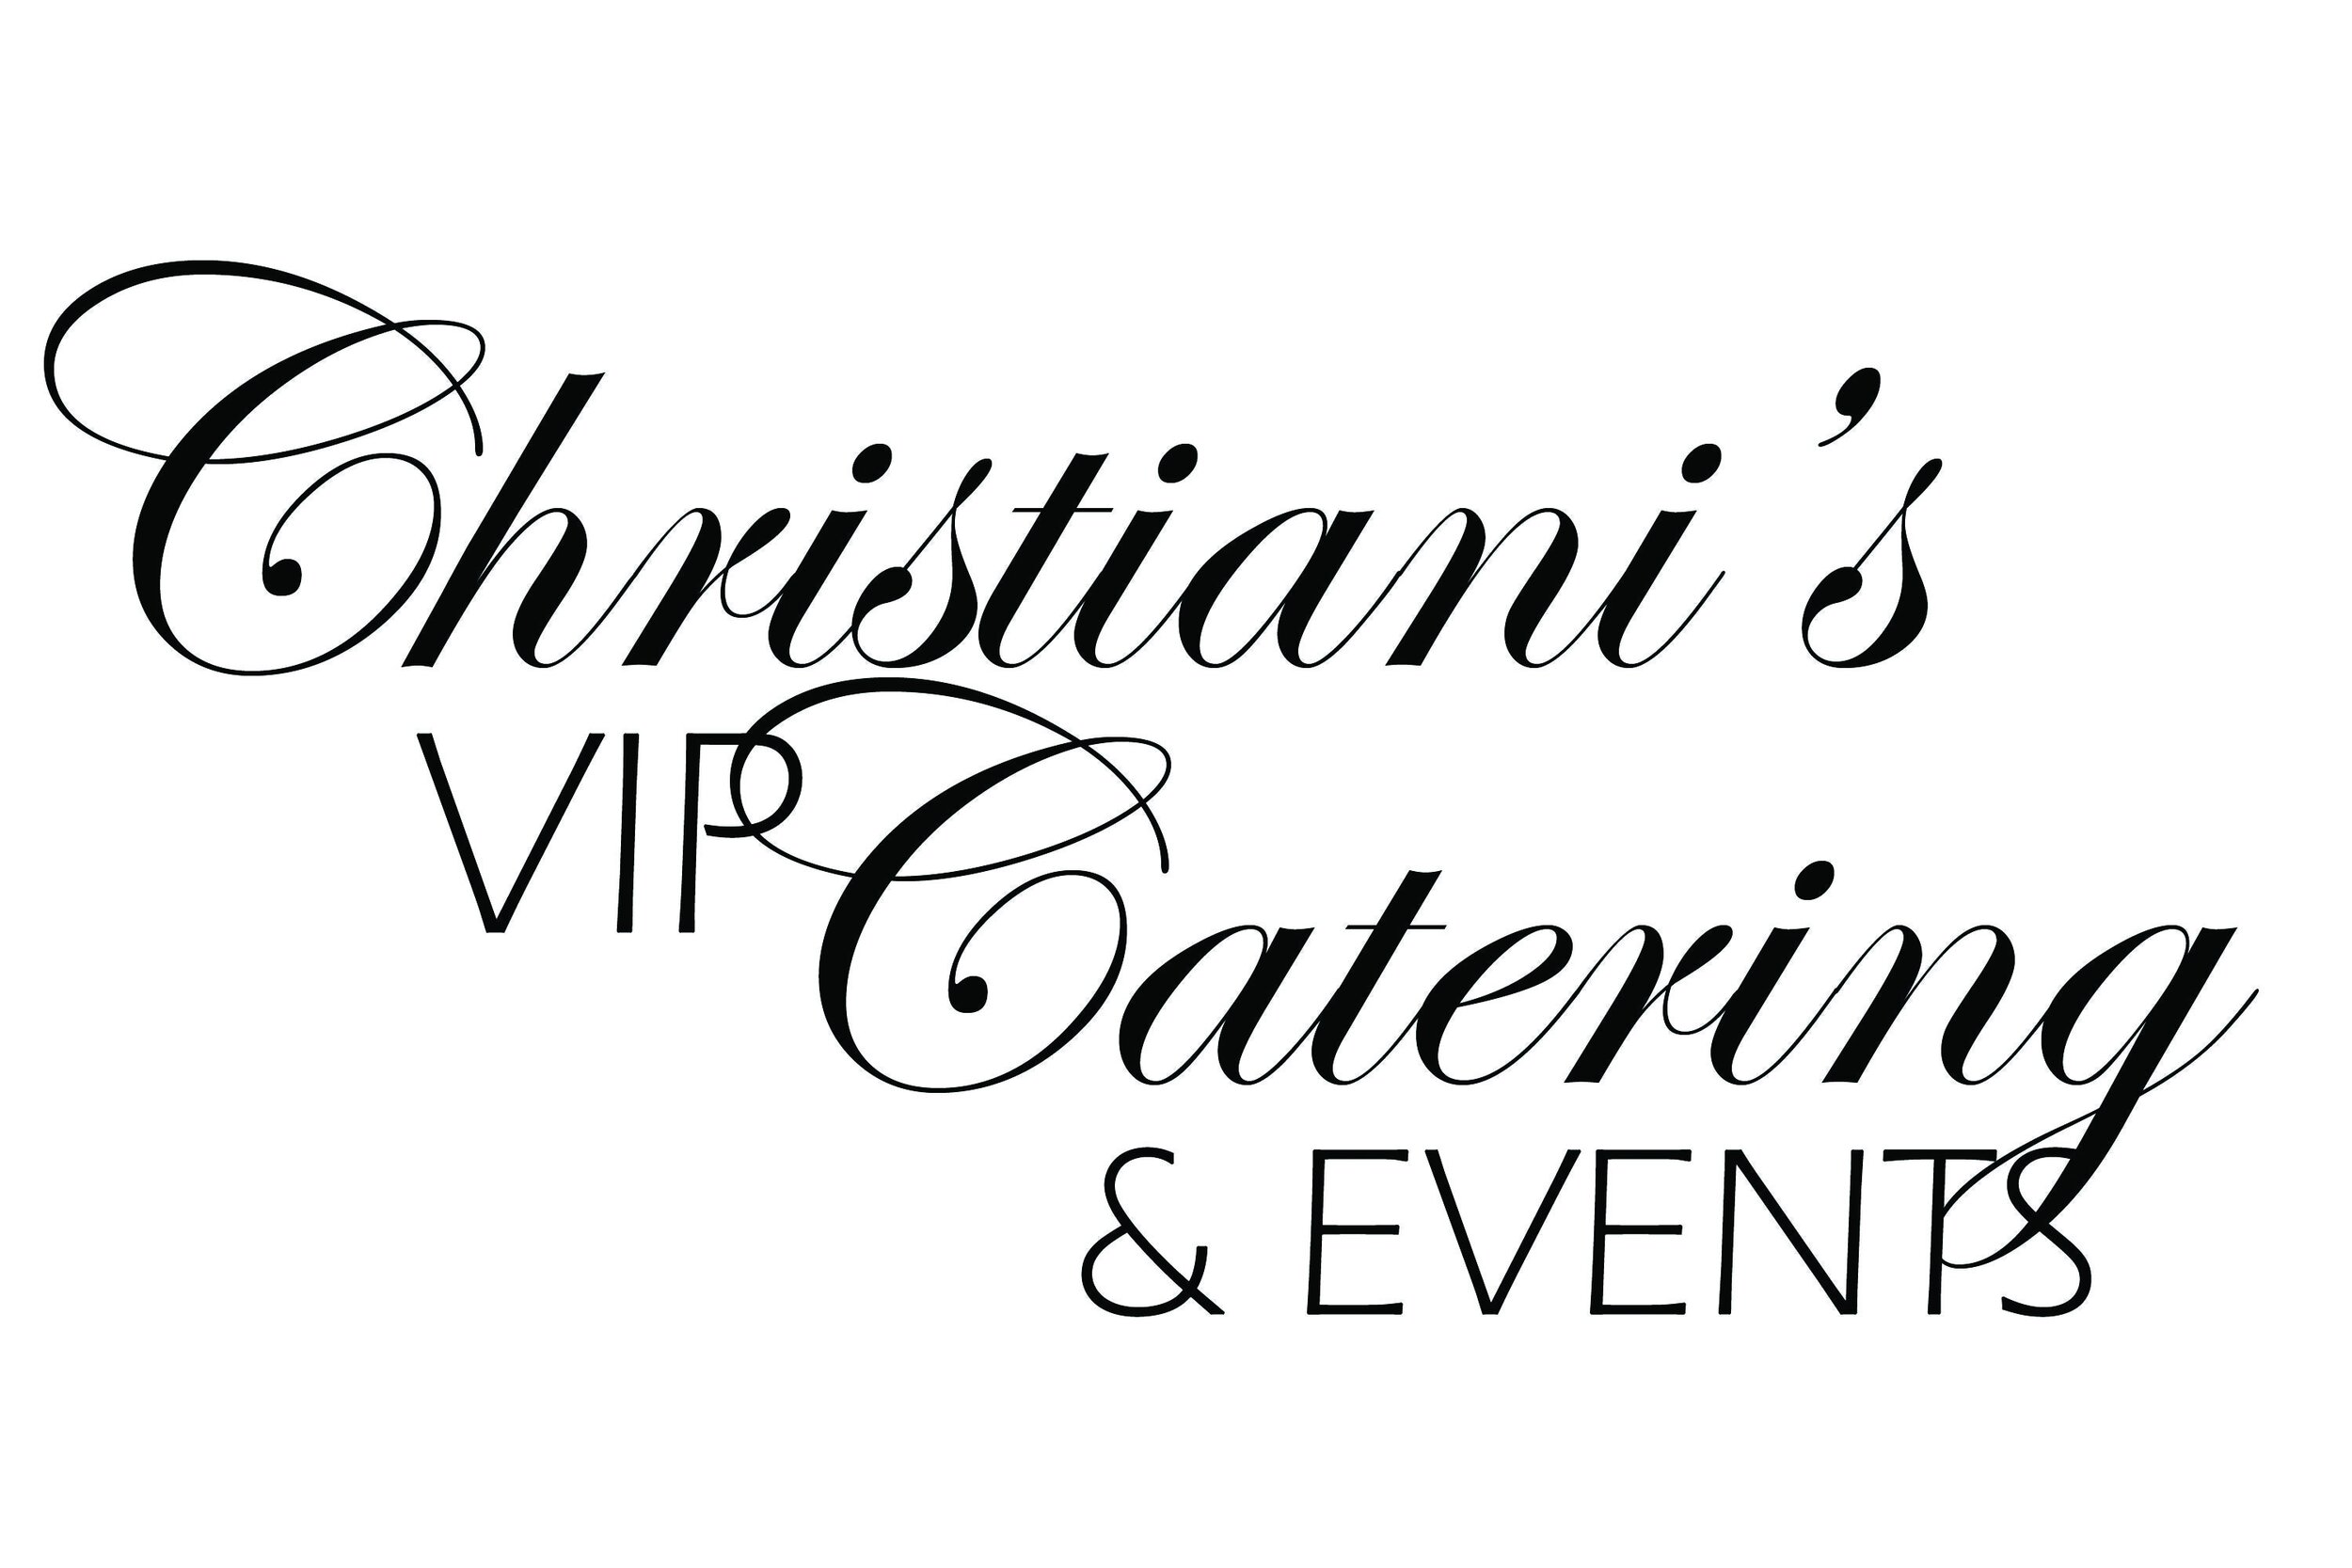 Christiani's VIP Catering Service